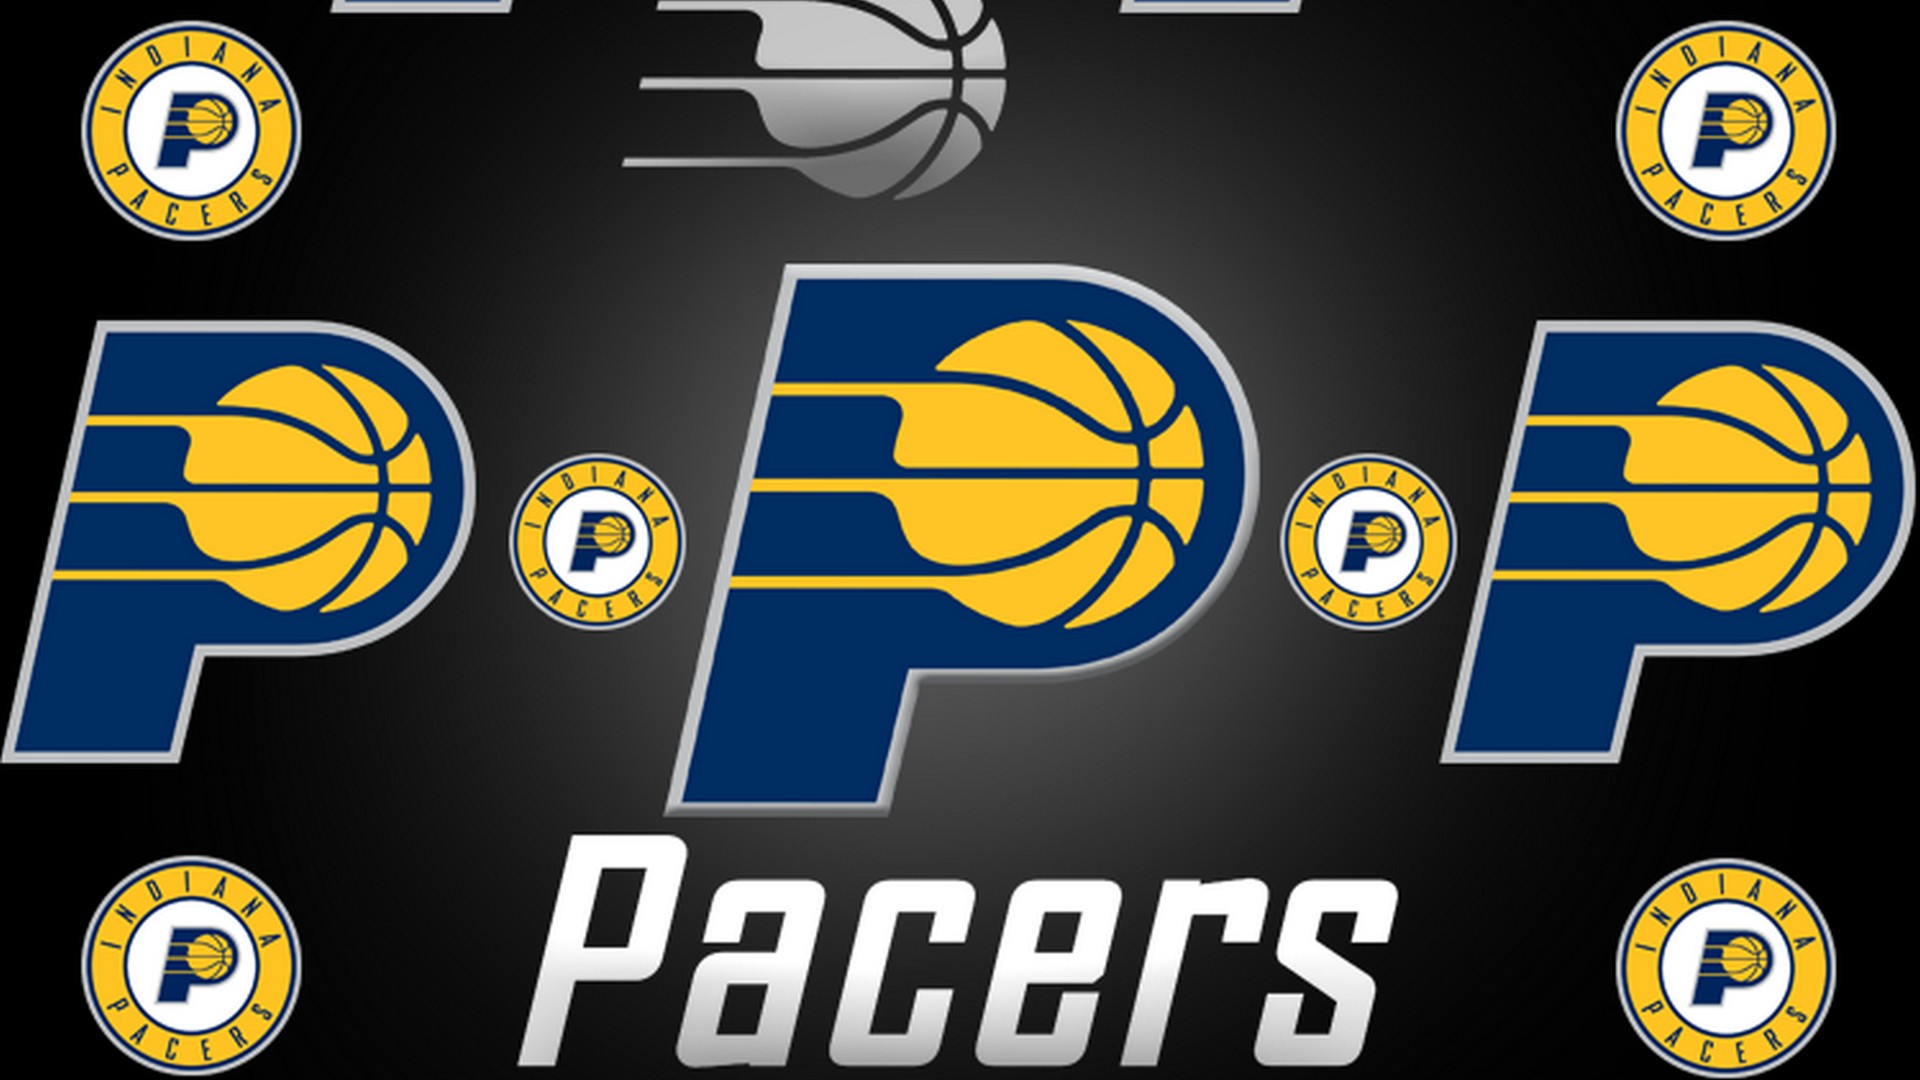 Indiana Pacers For Desktop Wallpaper with high-resolution 1920x1080 pixel. You can use this wallpaper for your Desktop Computer Backgrounds, Windows or Mac Screensavers, iPhone Lock screen, Tablet or Android and another Mobile Phone device